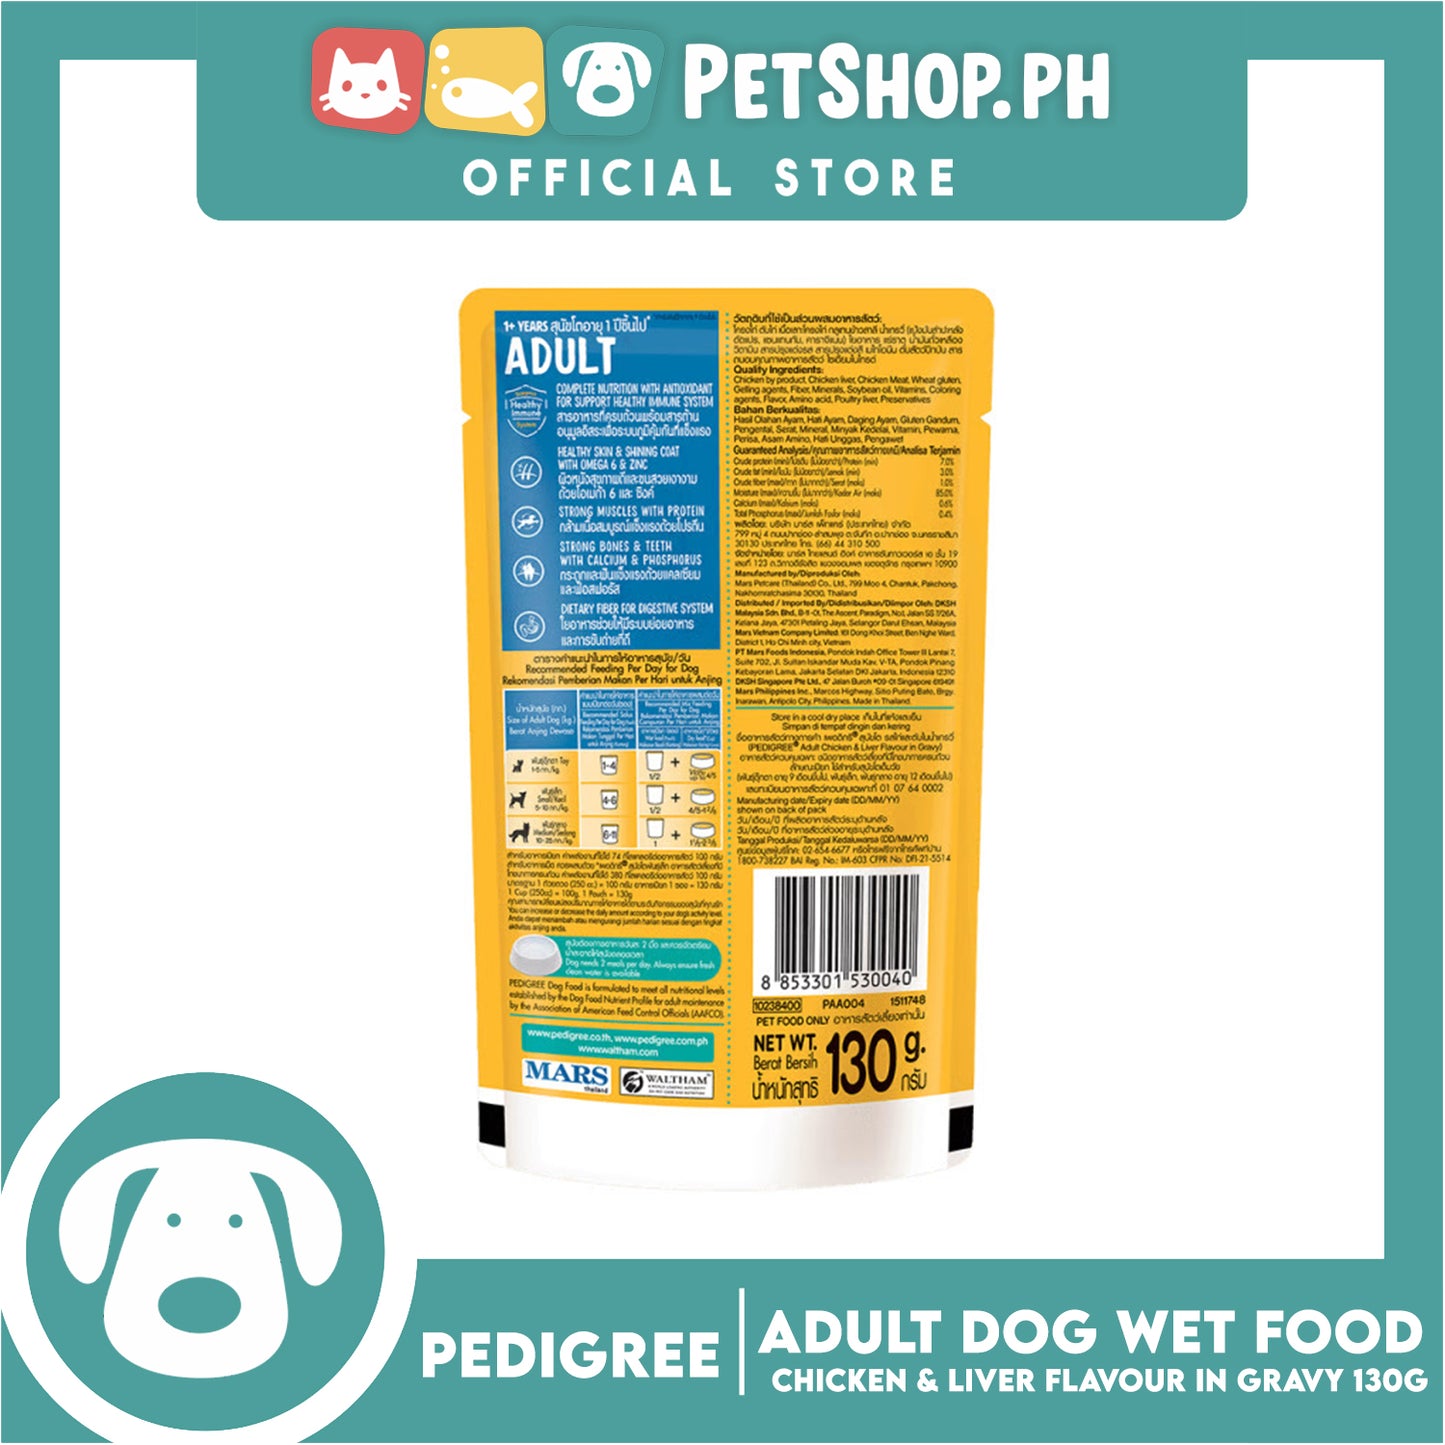 12pcs Pedigree Wet Food For Adult Dog, Complete And Balance Nutrition 130g (Chicken And Liver Flavor In Gravy)